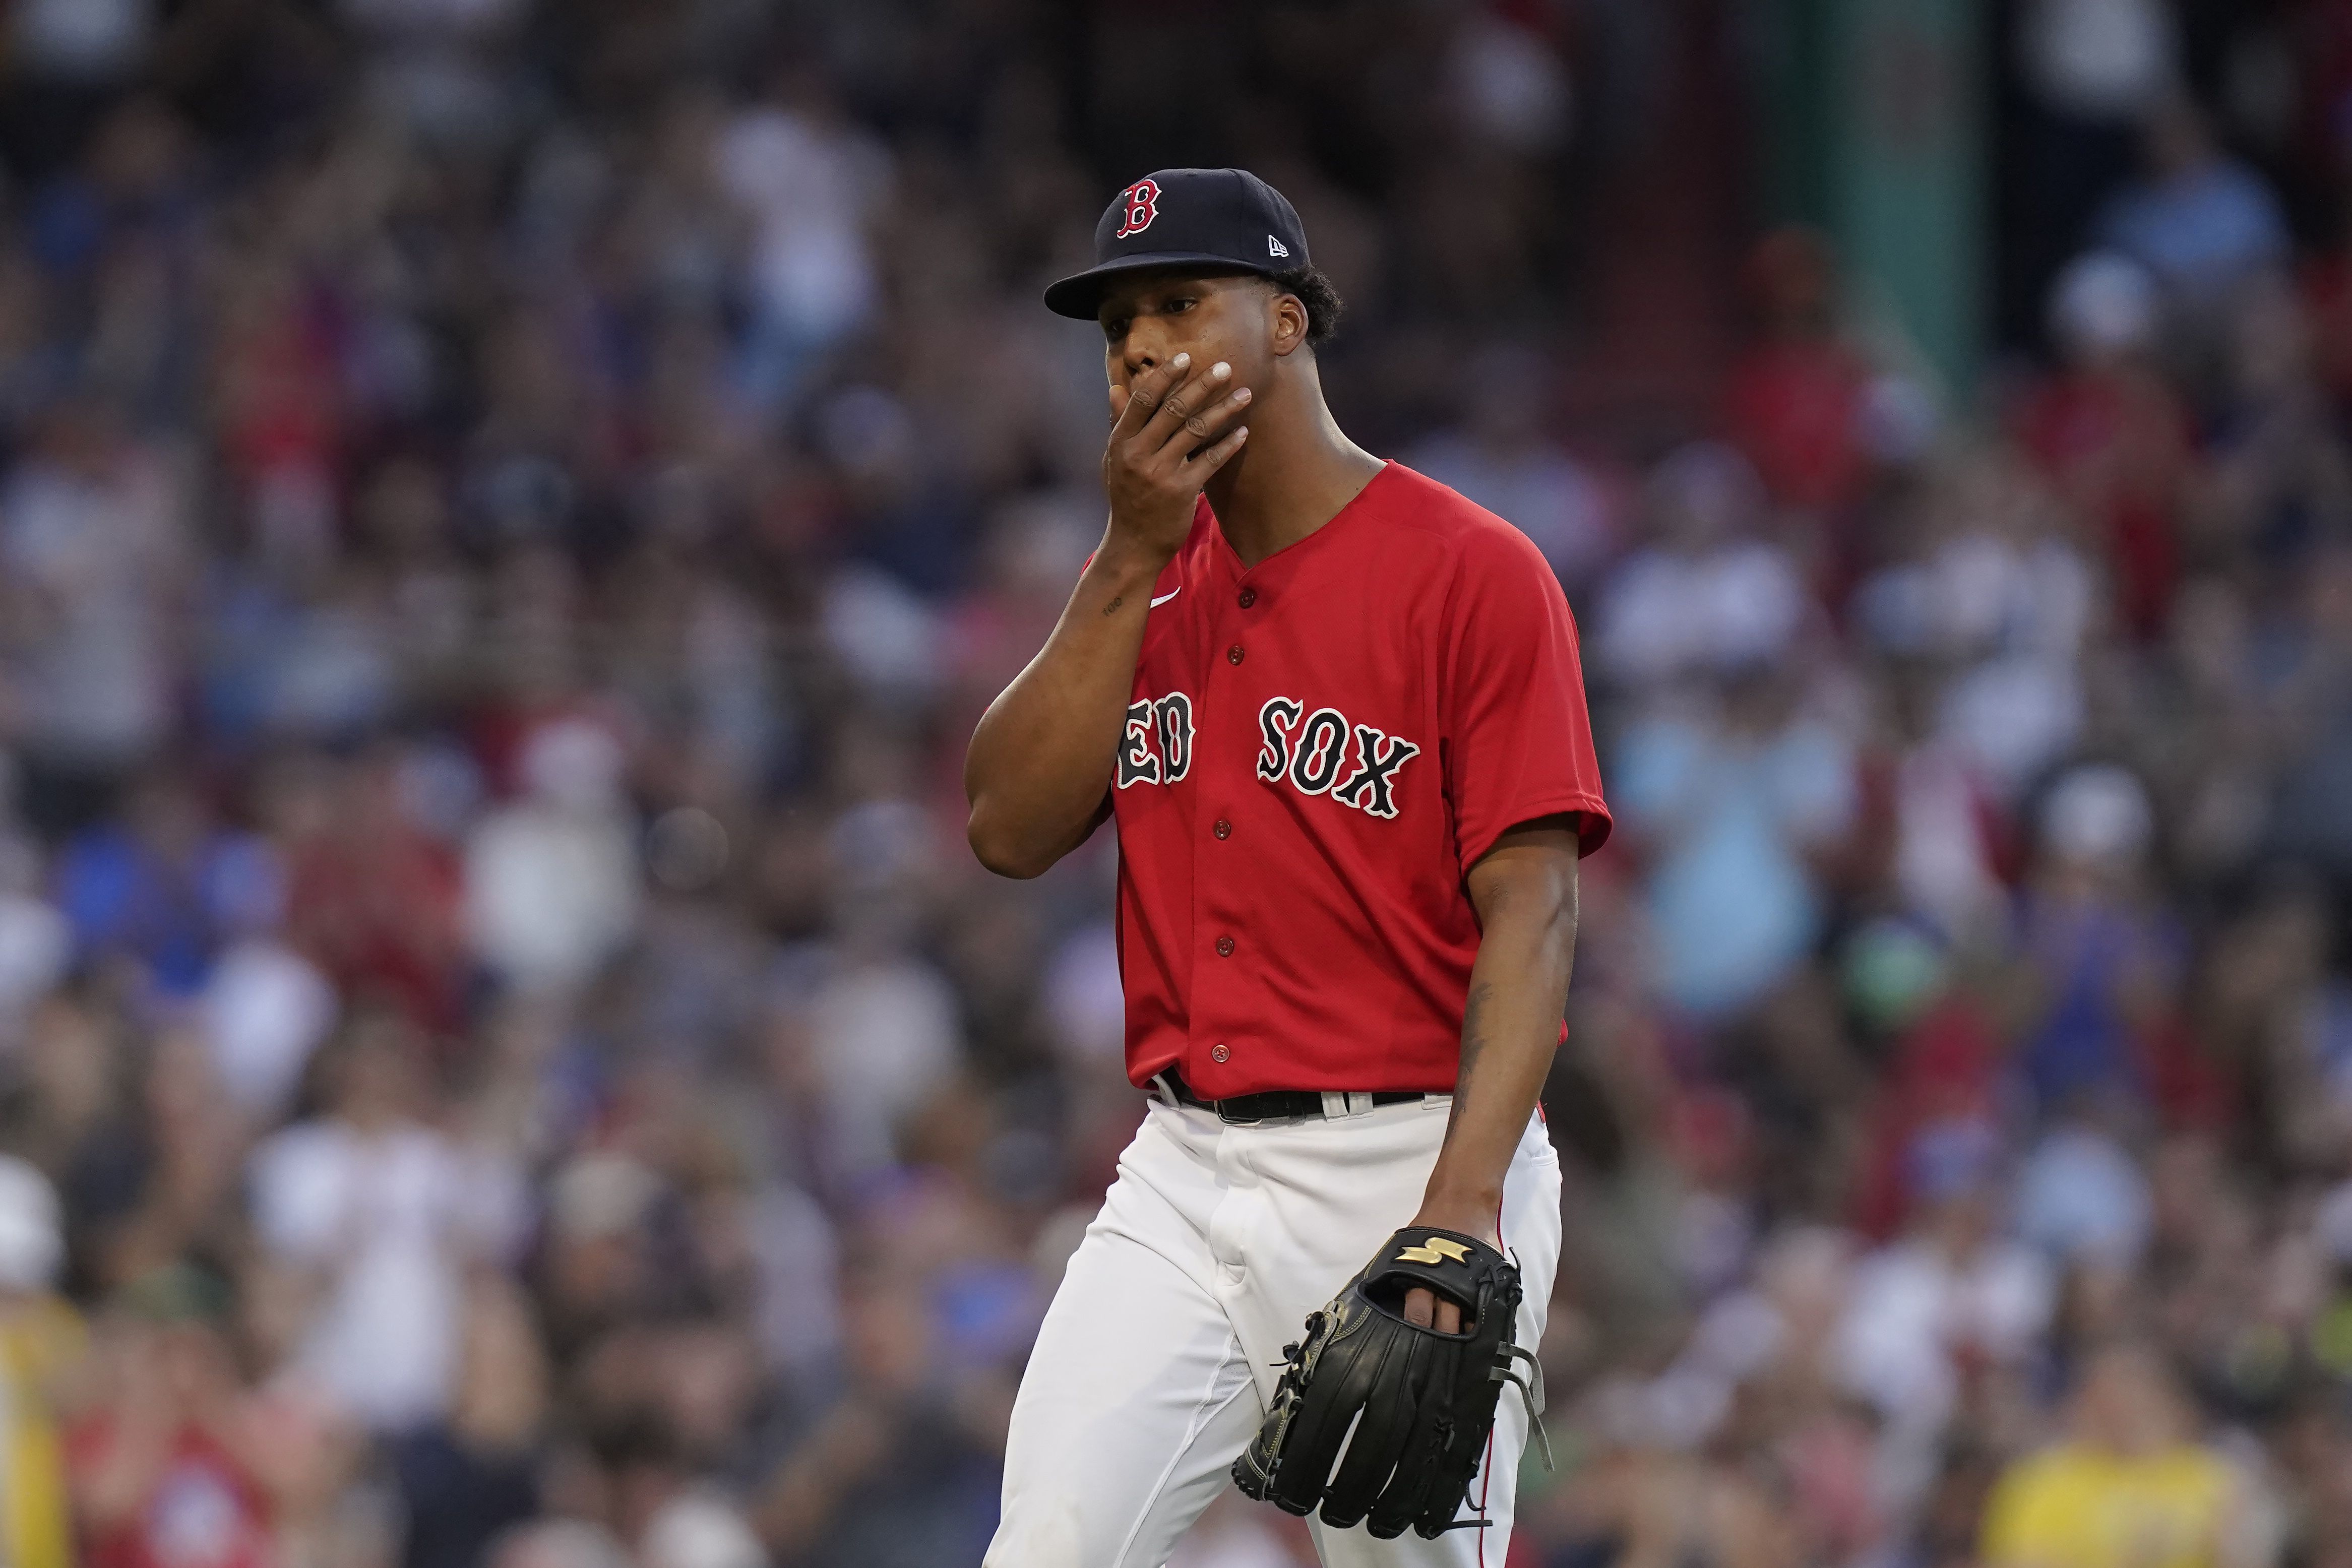 Inside Bello Day: How Brayan Bello has earned the trust of Red Sox fans